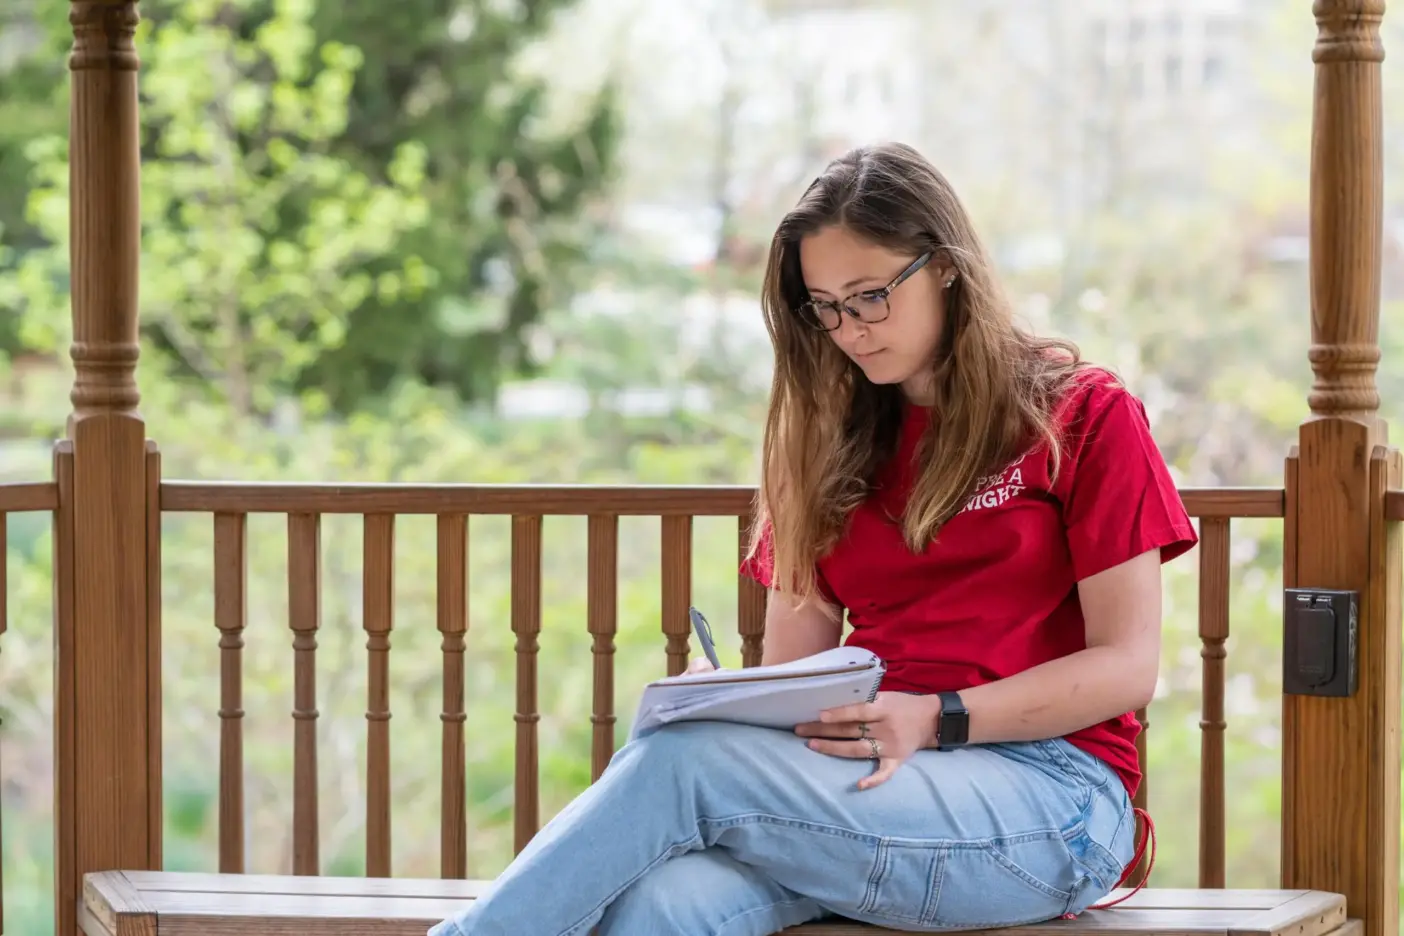 Student sits outside and writes in a notebook